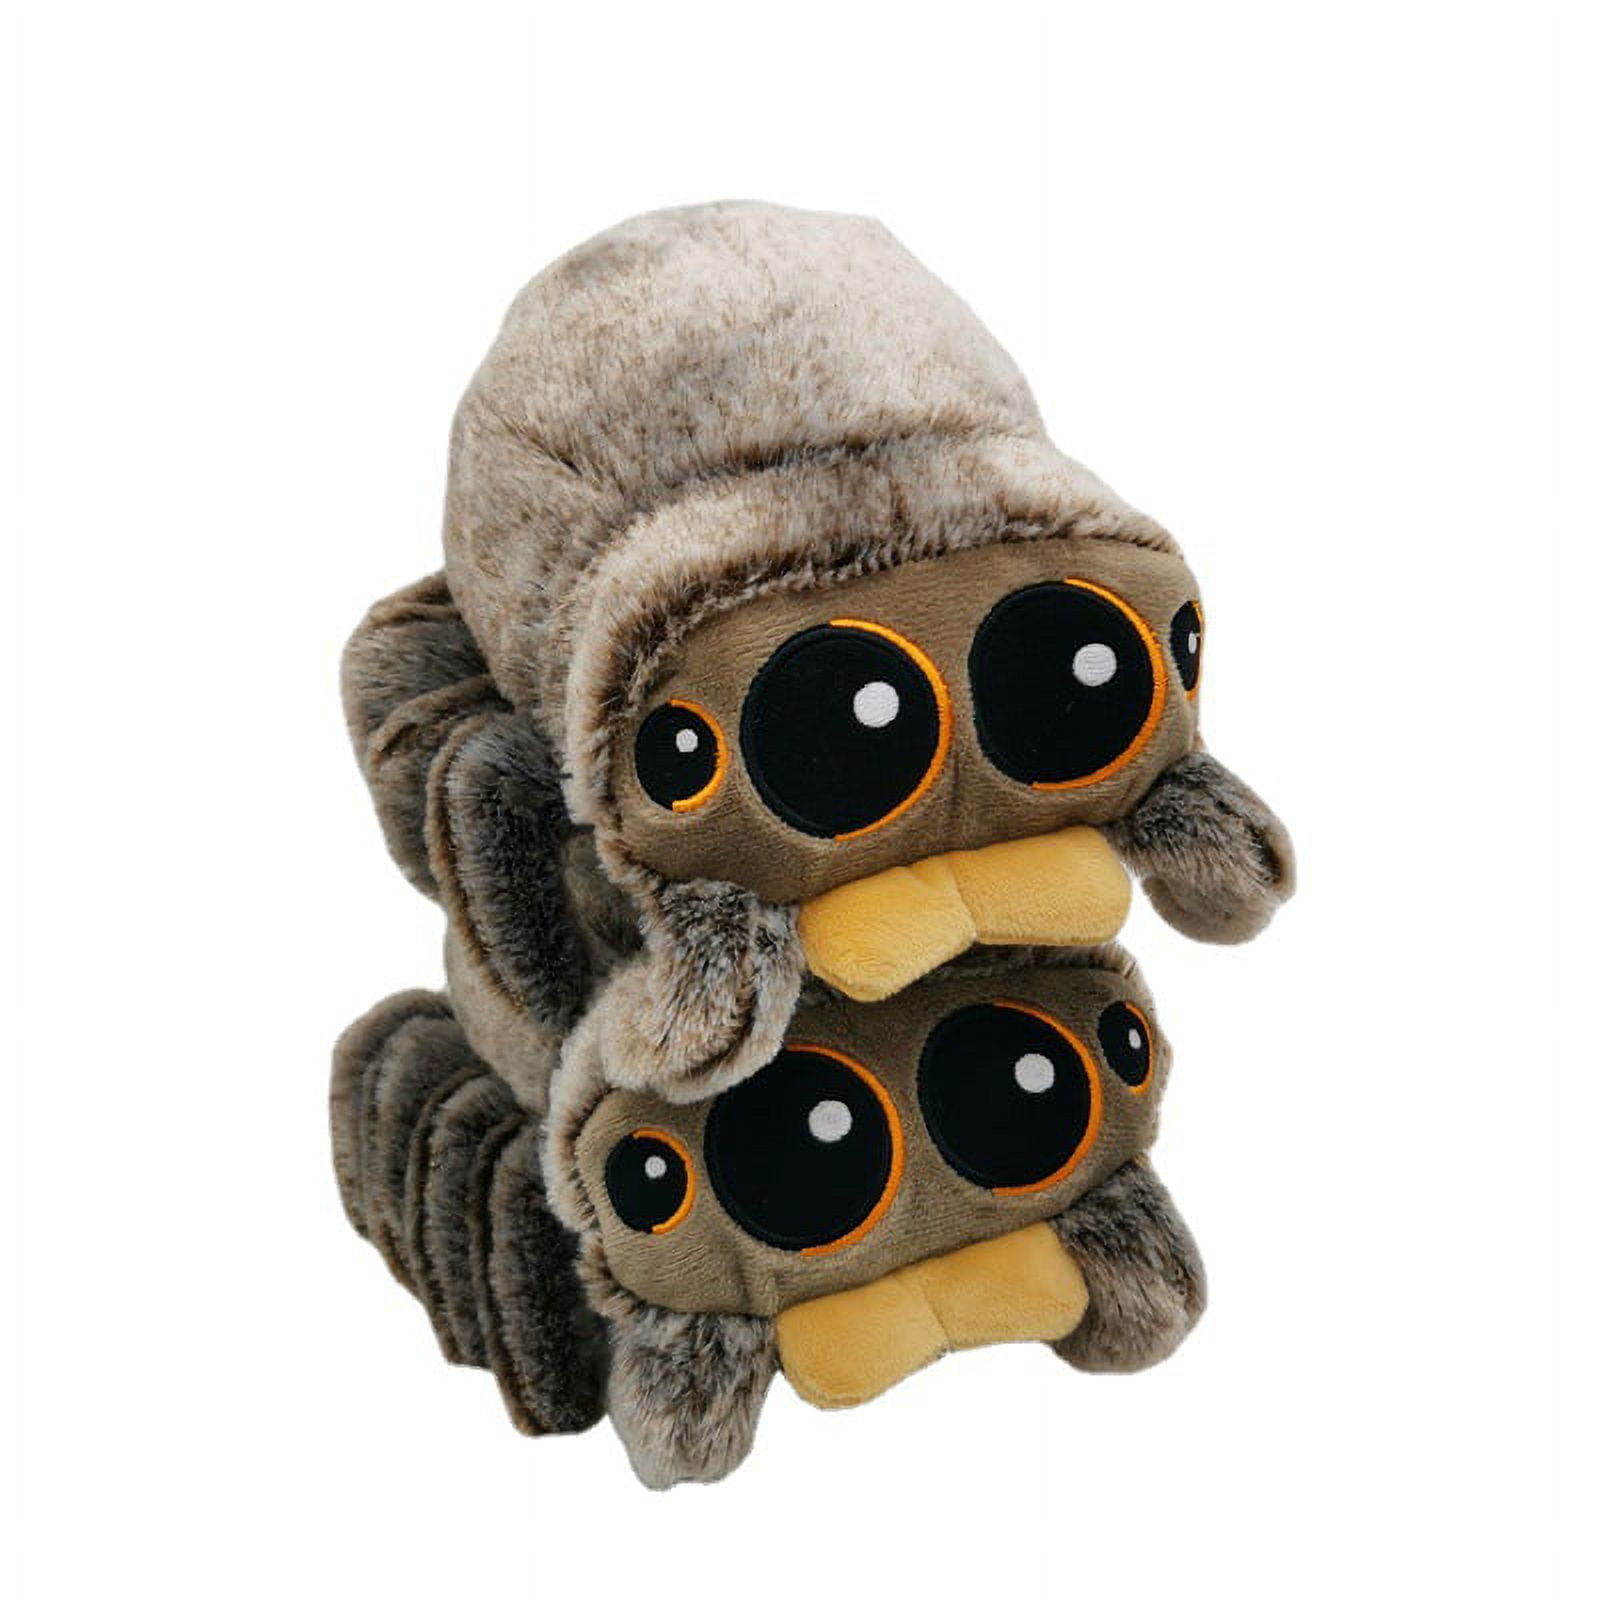  Cute Jumping Spider Plush Toy, Salticidae Springspinnen Spider  Stuffed Animals Soft Spider Plushie Dolls Birthday Gifts for Kids Fans  Adults Children : Toys & Games